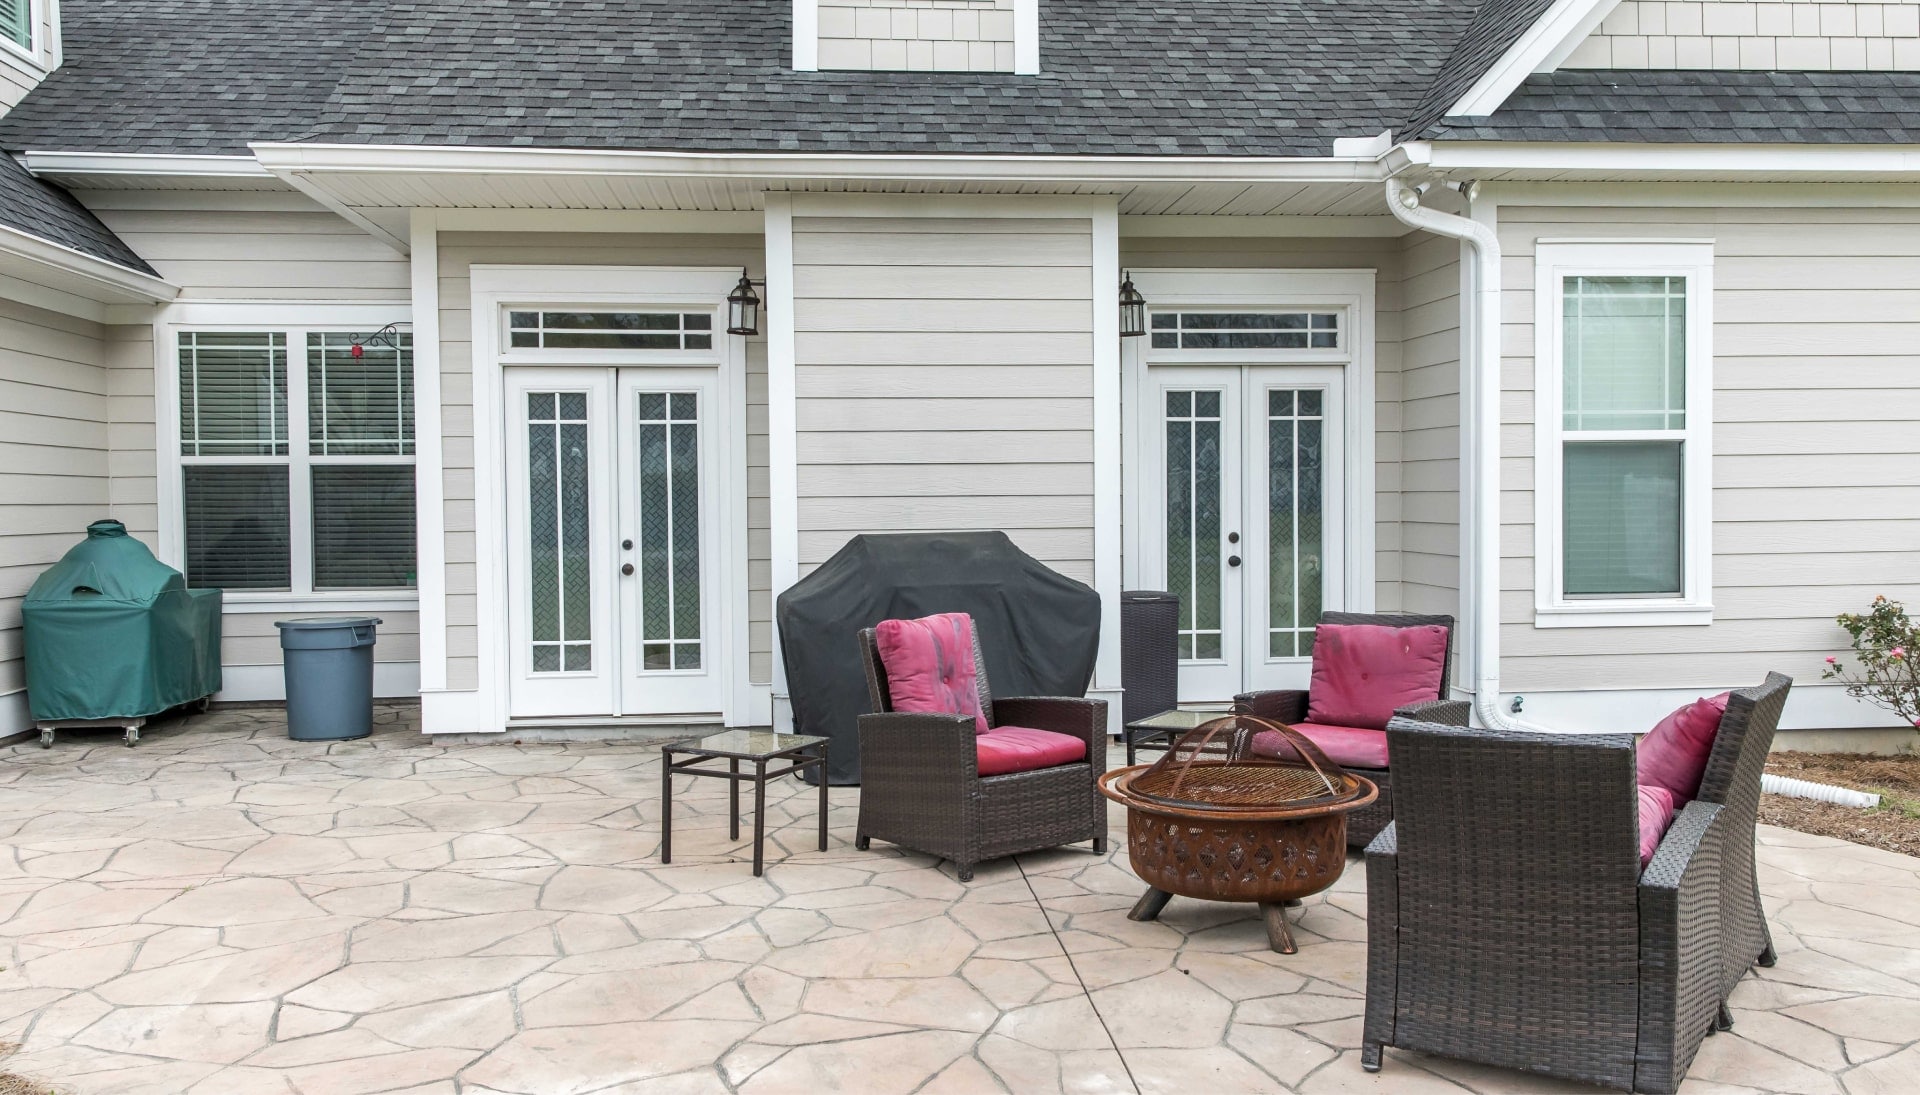 Elevate Your Outdoor Living Space with Stunning Stamped Concrete Patio in Lima, OH - Choose from a Variety of Creative Patterns and Colors to Achieve a Unique and Eye-Catching Look for Your Patio with Long-Lasting Durability and Low-Maintenance.